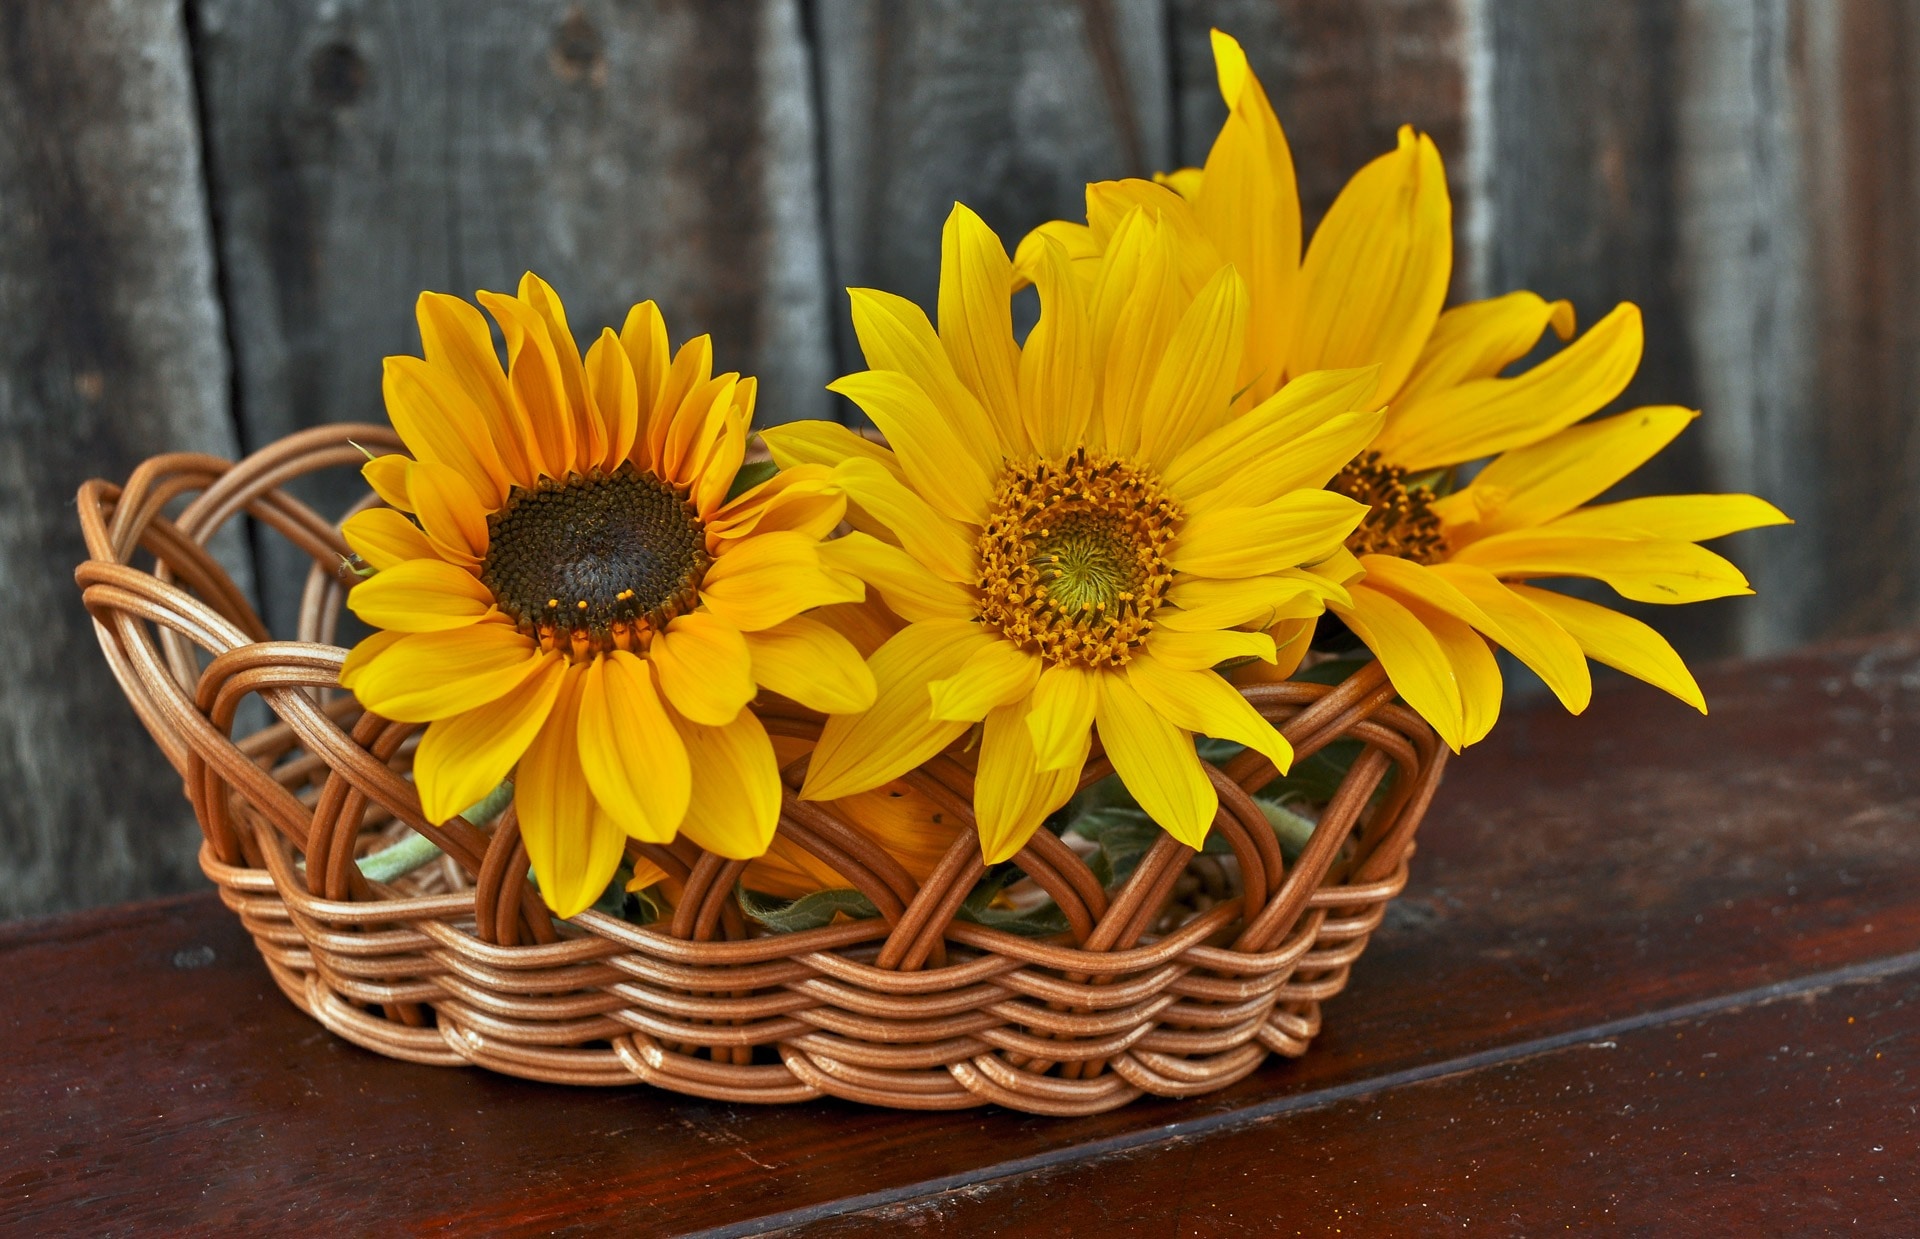 sunflowers and wooden basket